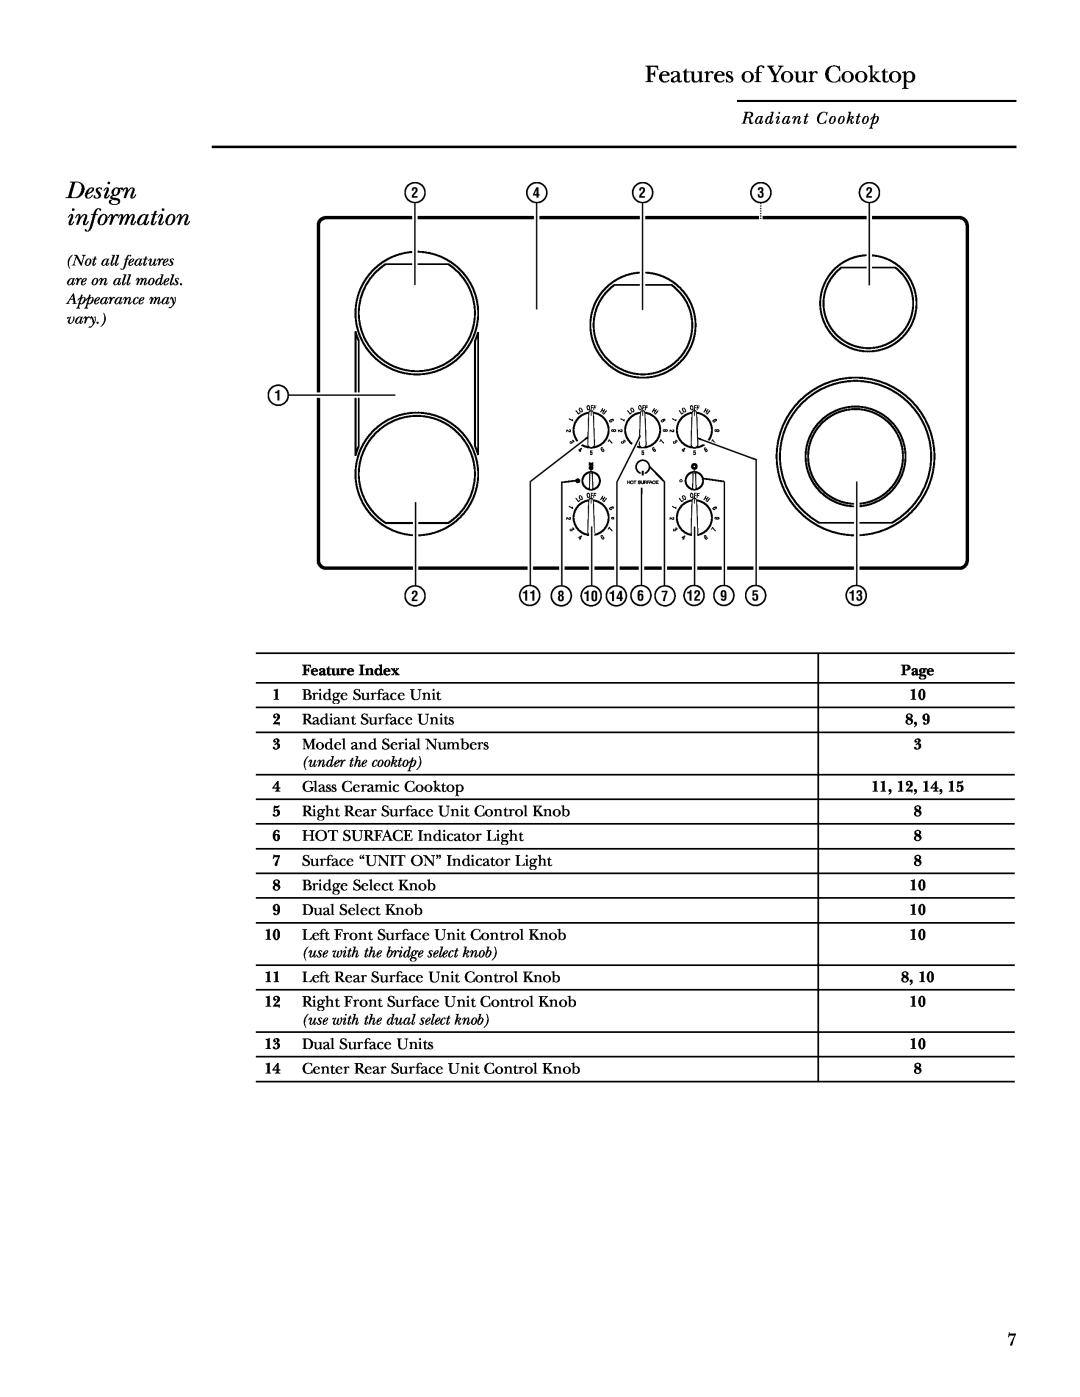 GE ZEU769 owner manual Design information, Features of Your Cooktop, under the cooktop, use with the bridge select knob 